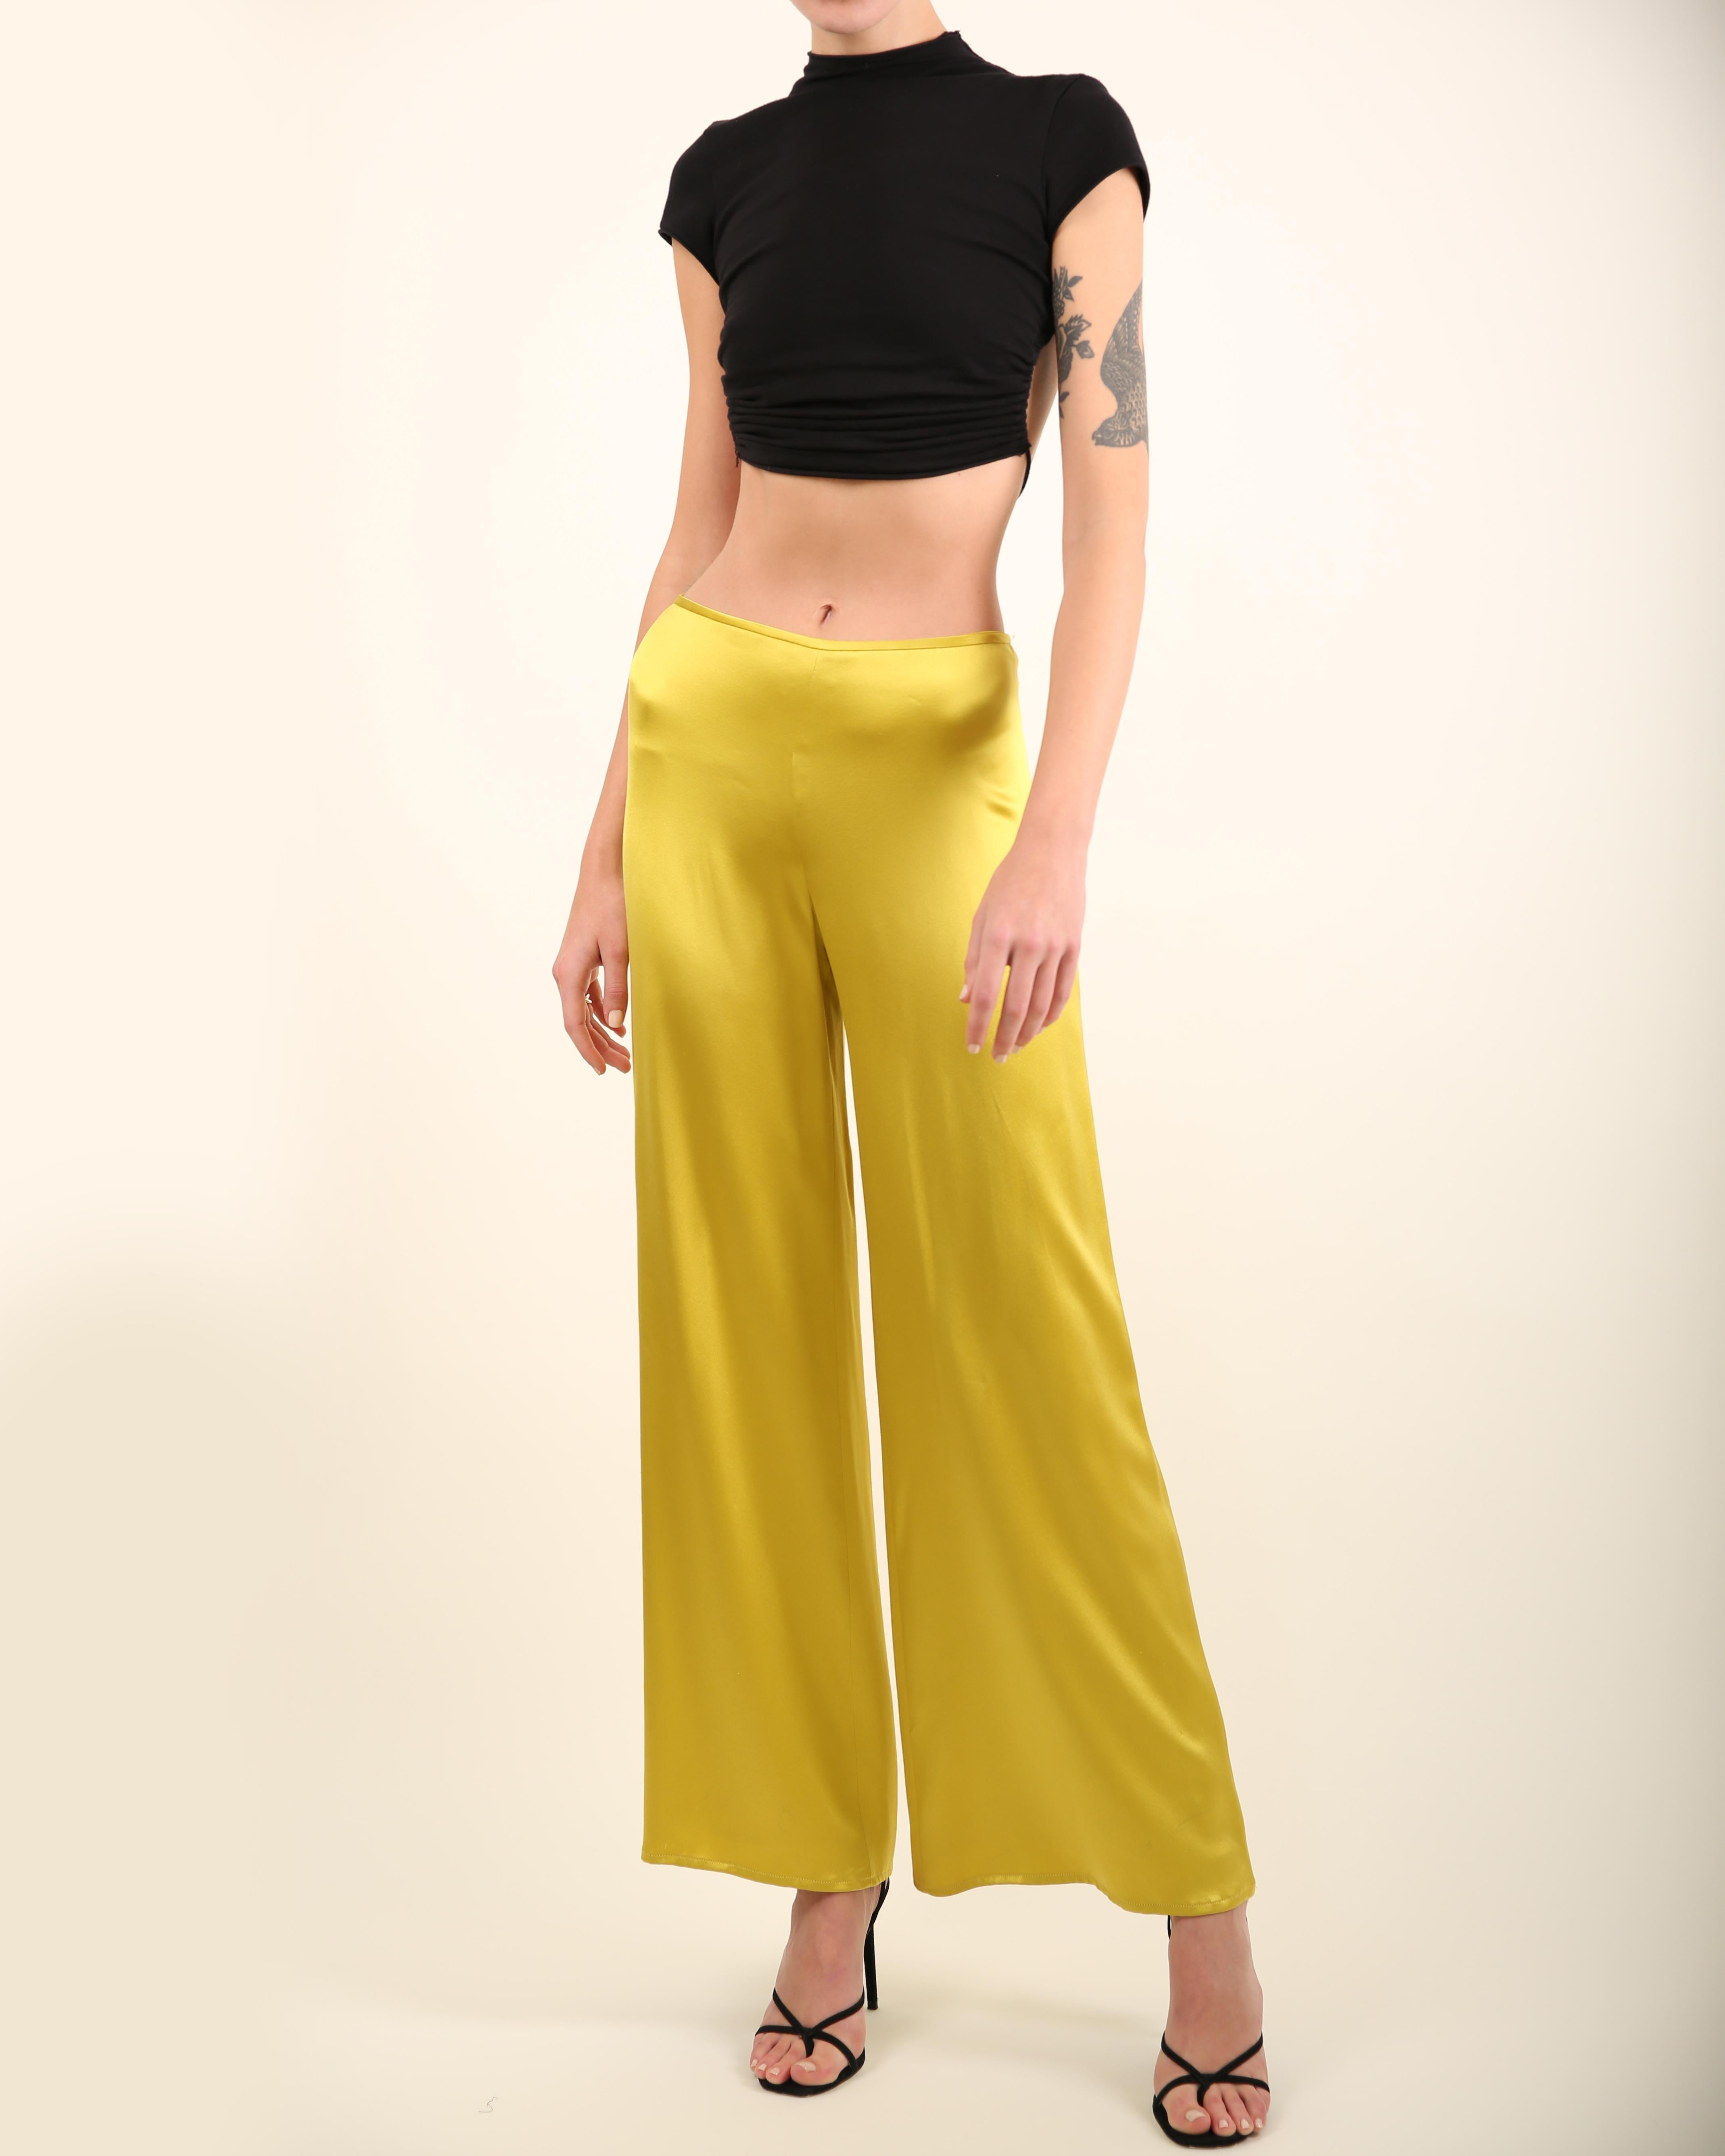 Naeem Khan wide leg trouser pants in a gorgeous shade of bright chartreuse 
Wear these high or low on the waist depending on the desired fit

Composition
100% Silk

Size
US 4

In good condition with some slight marks, pulls and scuffs to the fabric.